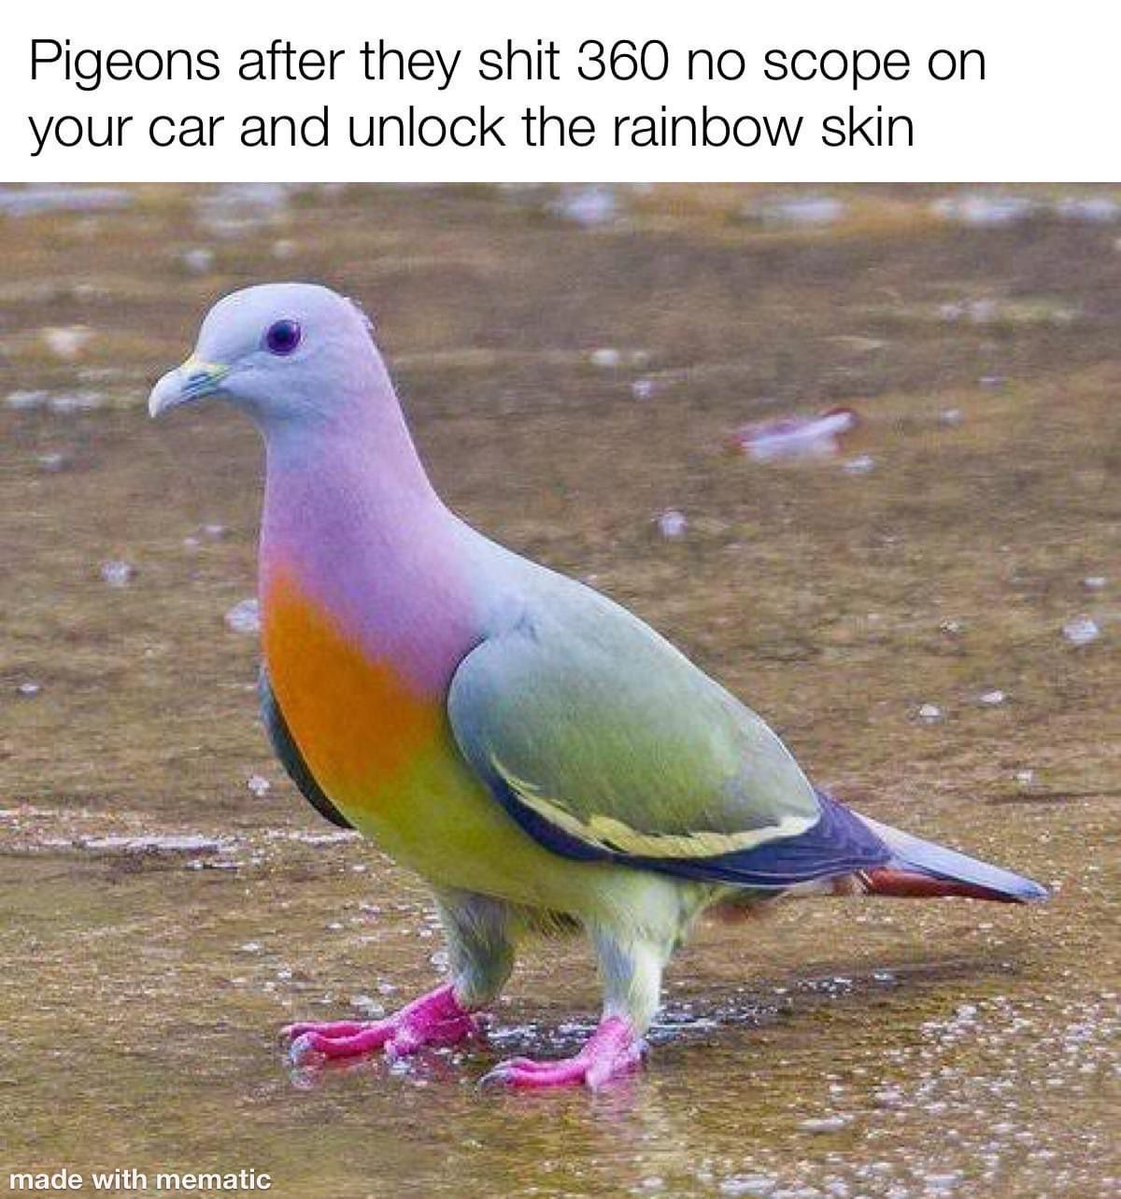 funny gaming memes - most beautiful bird - Pigeons after they shit 360 no scope on your car and unlock the rainbow skin made with mematic